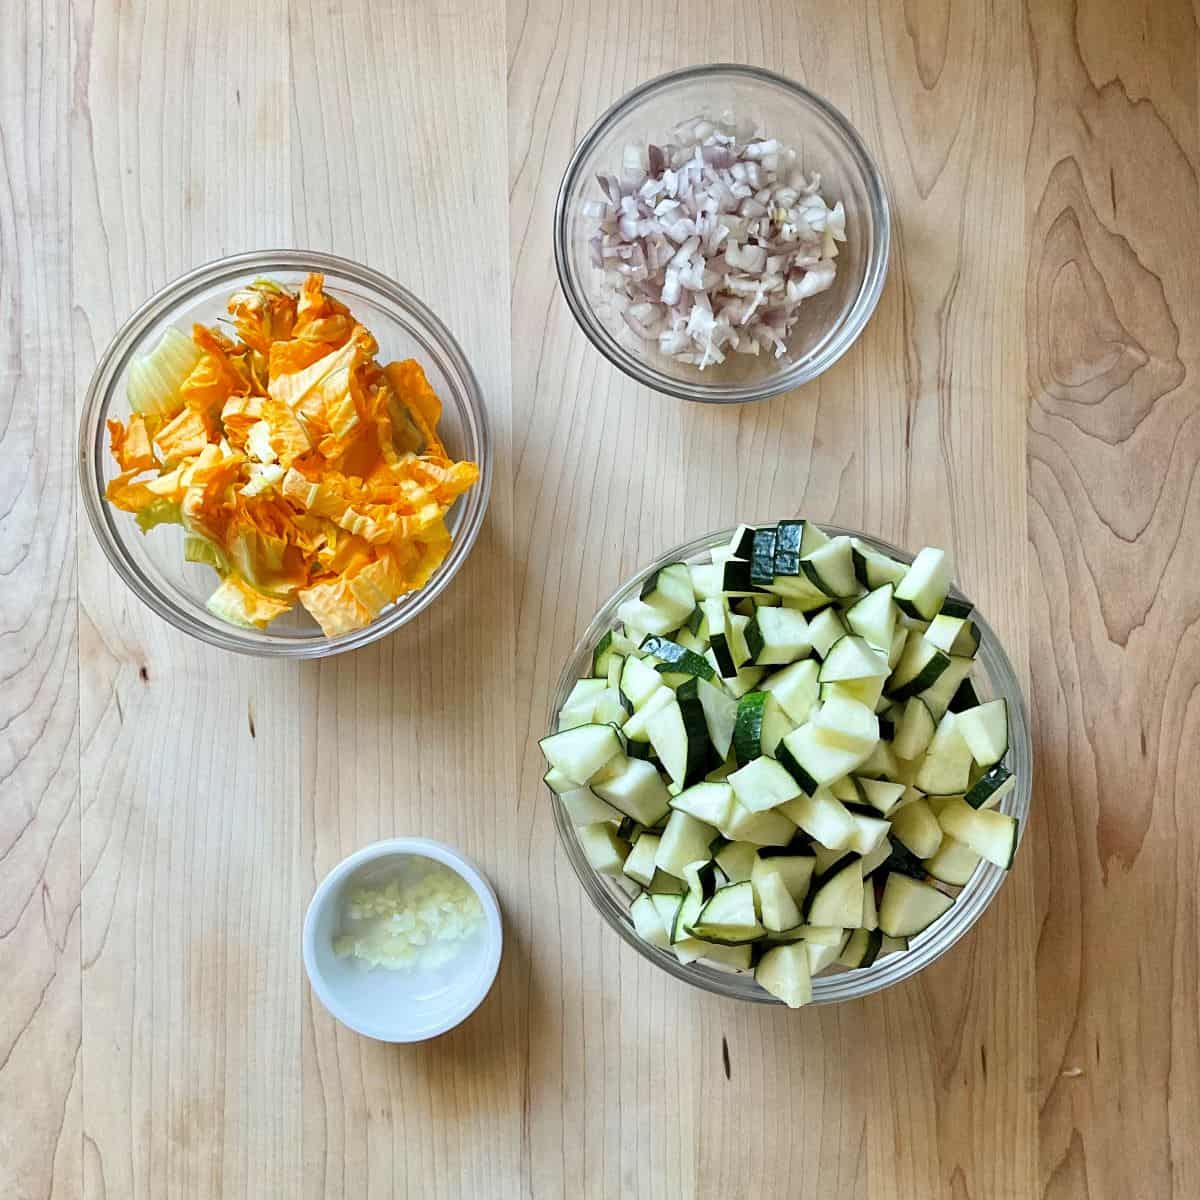 Chopped up vegetables to make risotto with zucchini.